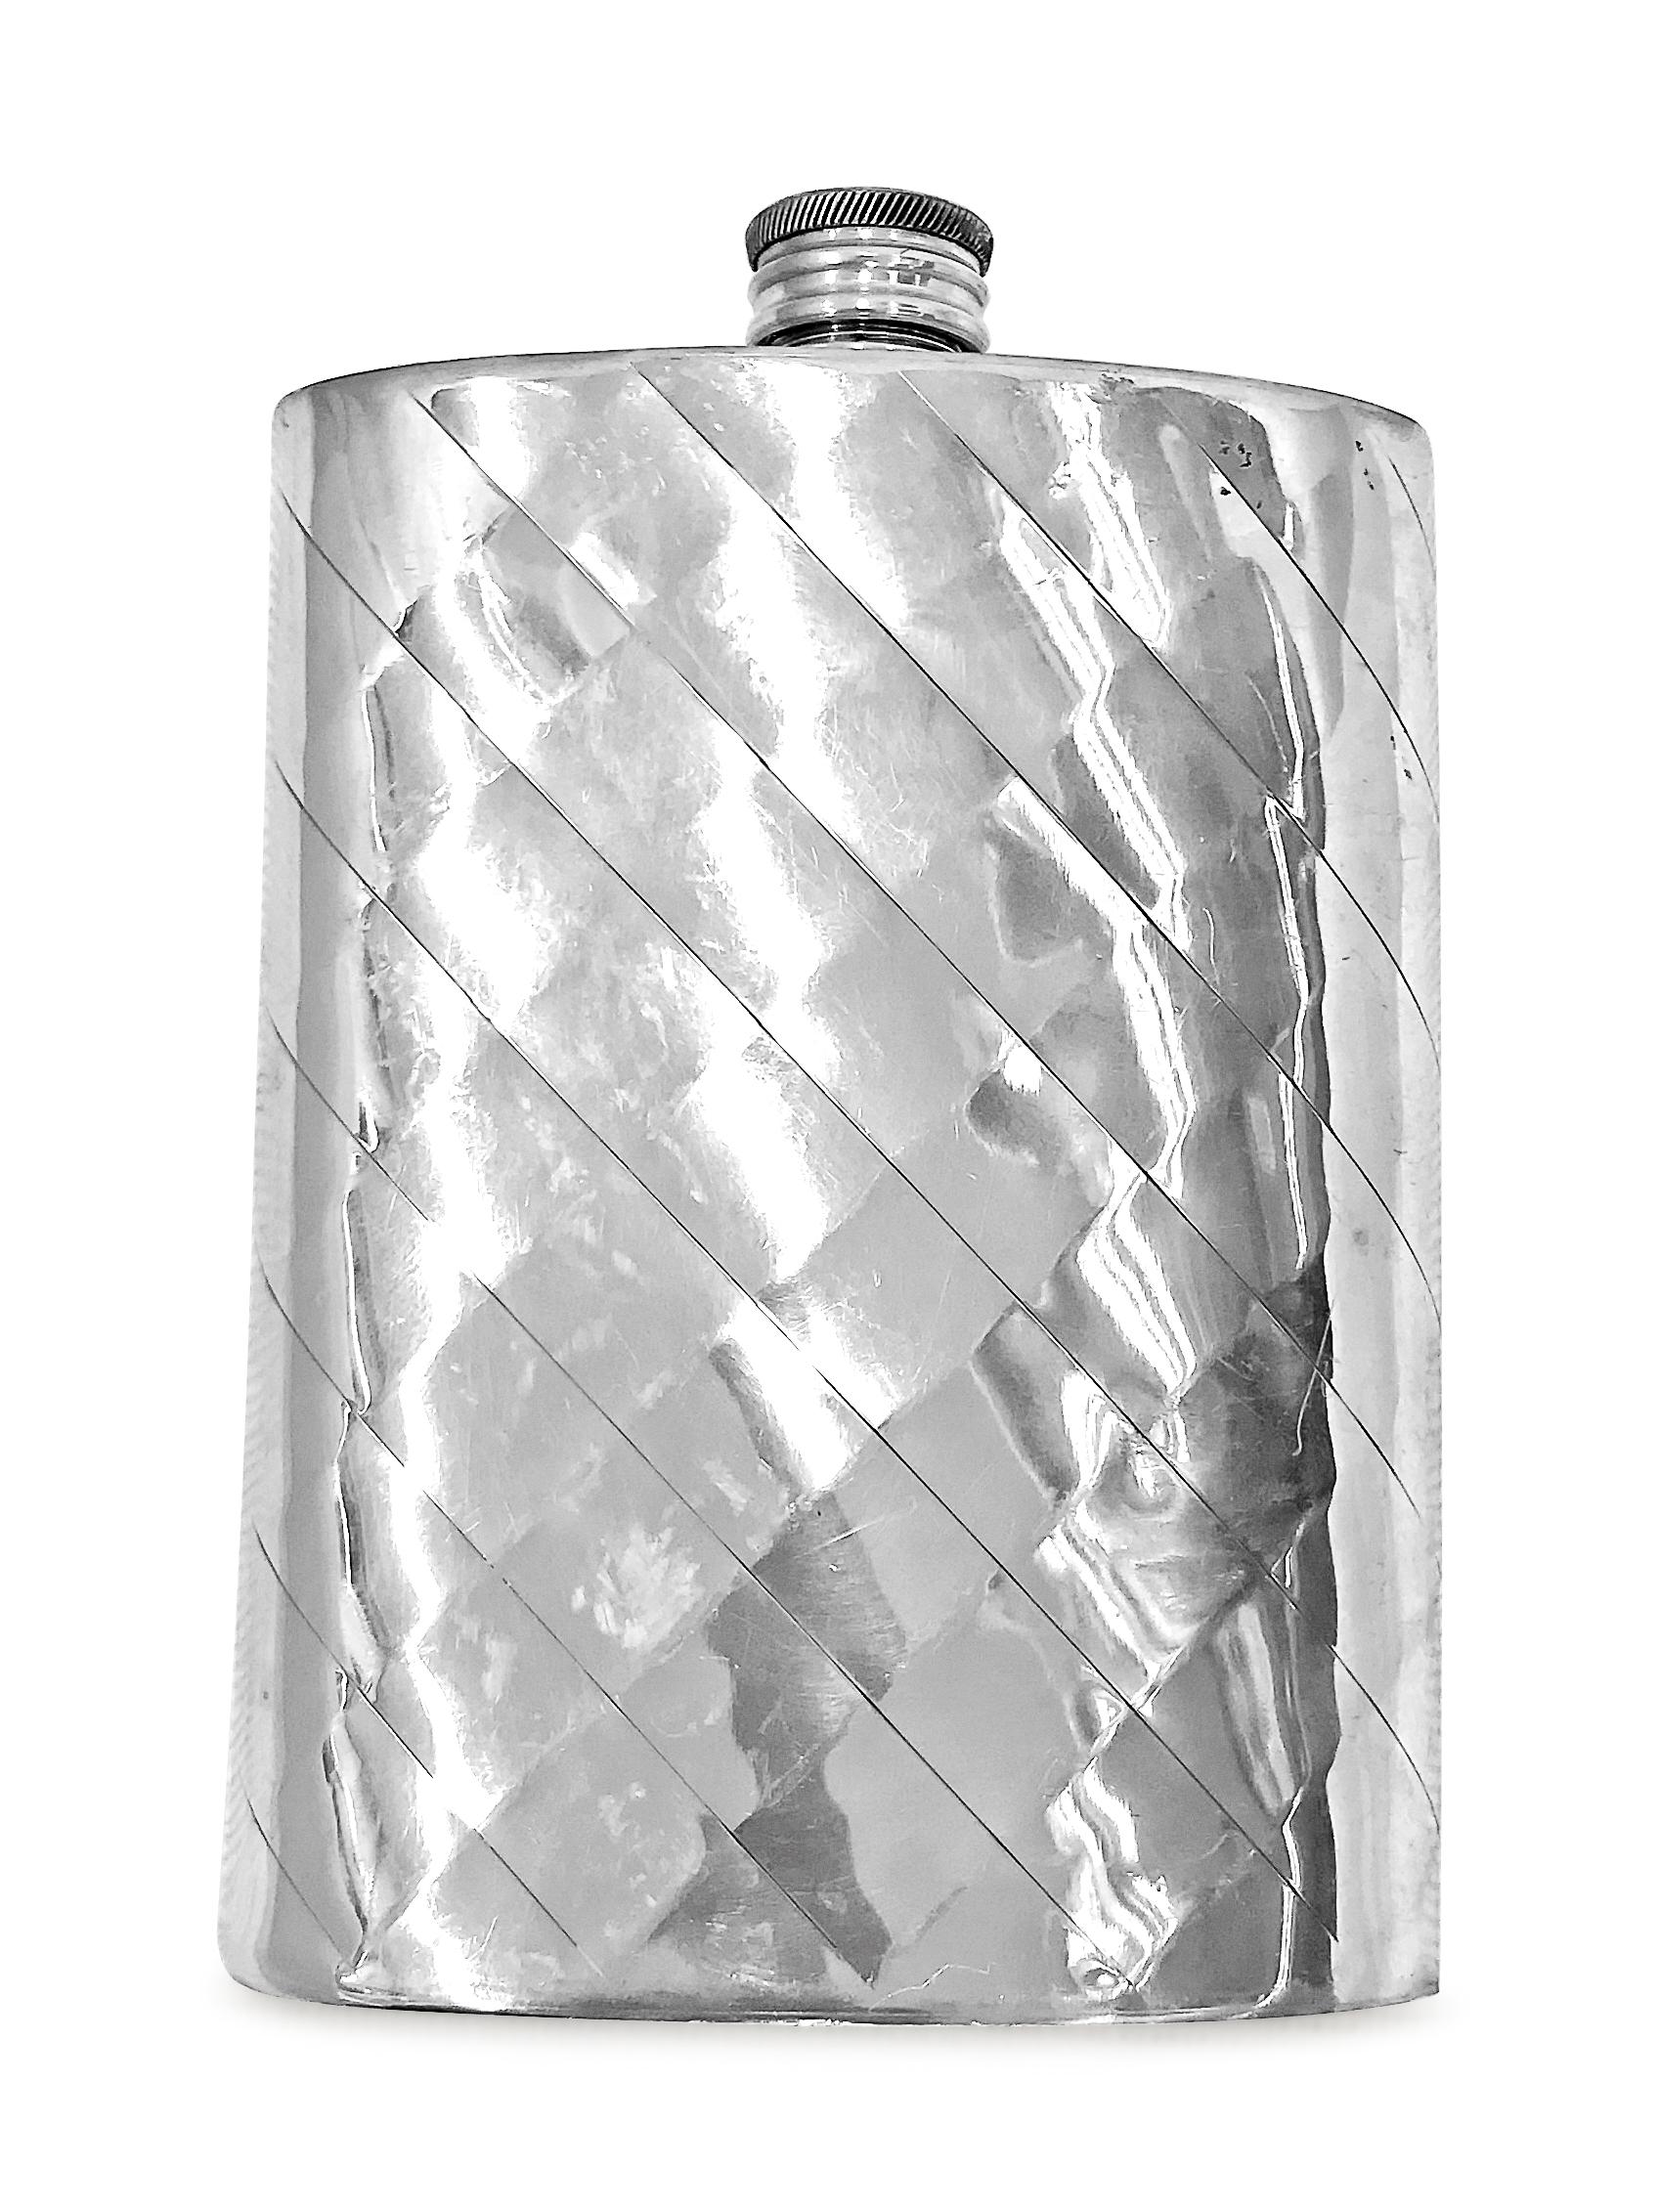 A beautiful 8 ounce  thermos made in Sheffield England . This English pewter thermos  has a diamond shape design by hand .
W ; 1